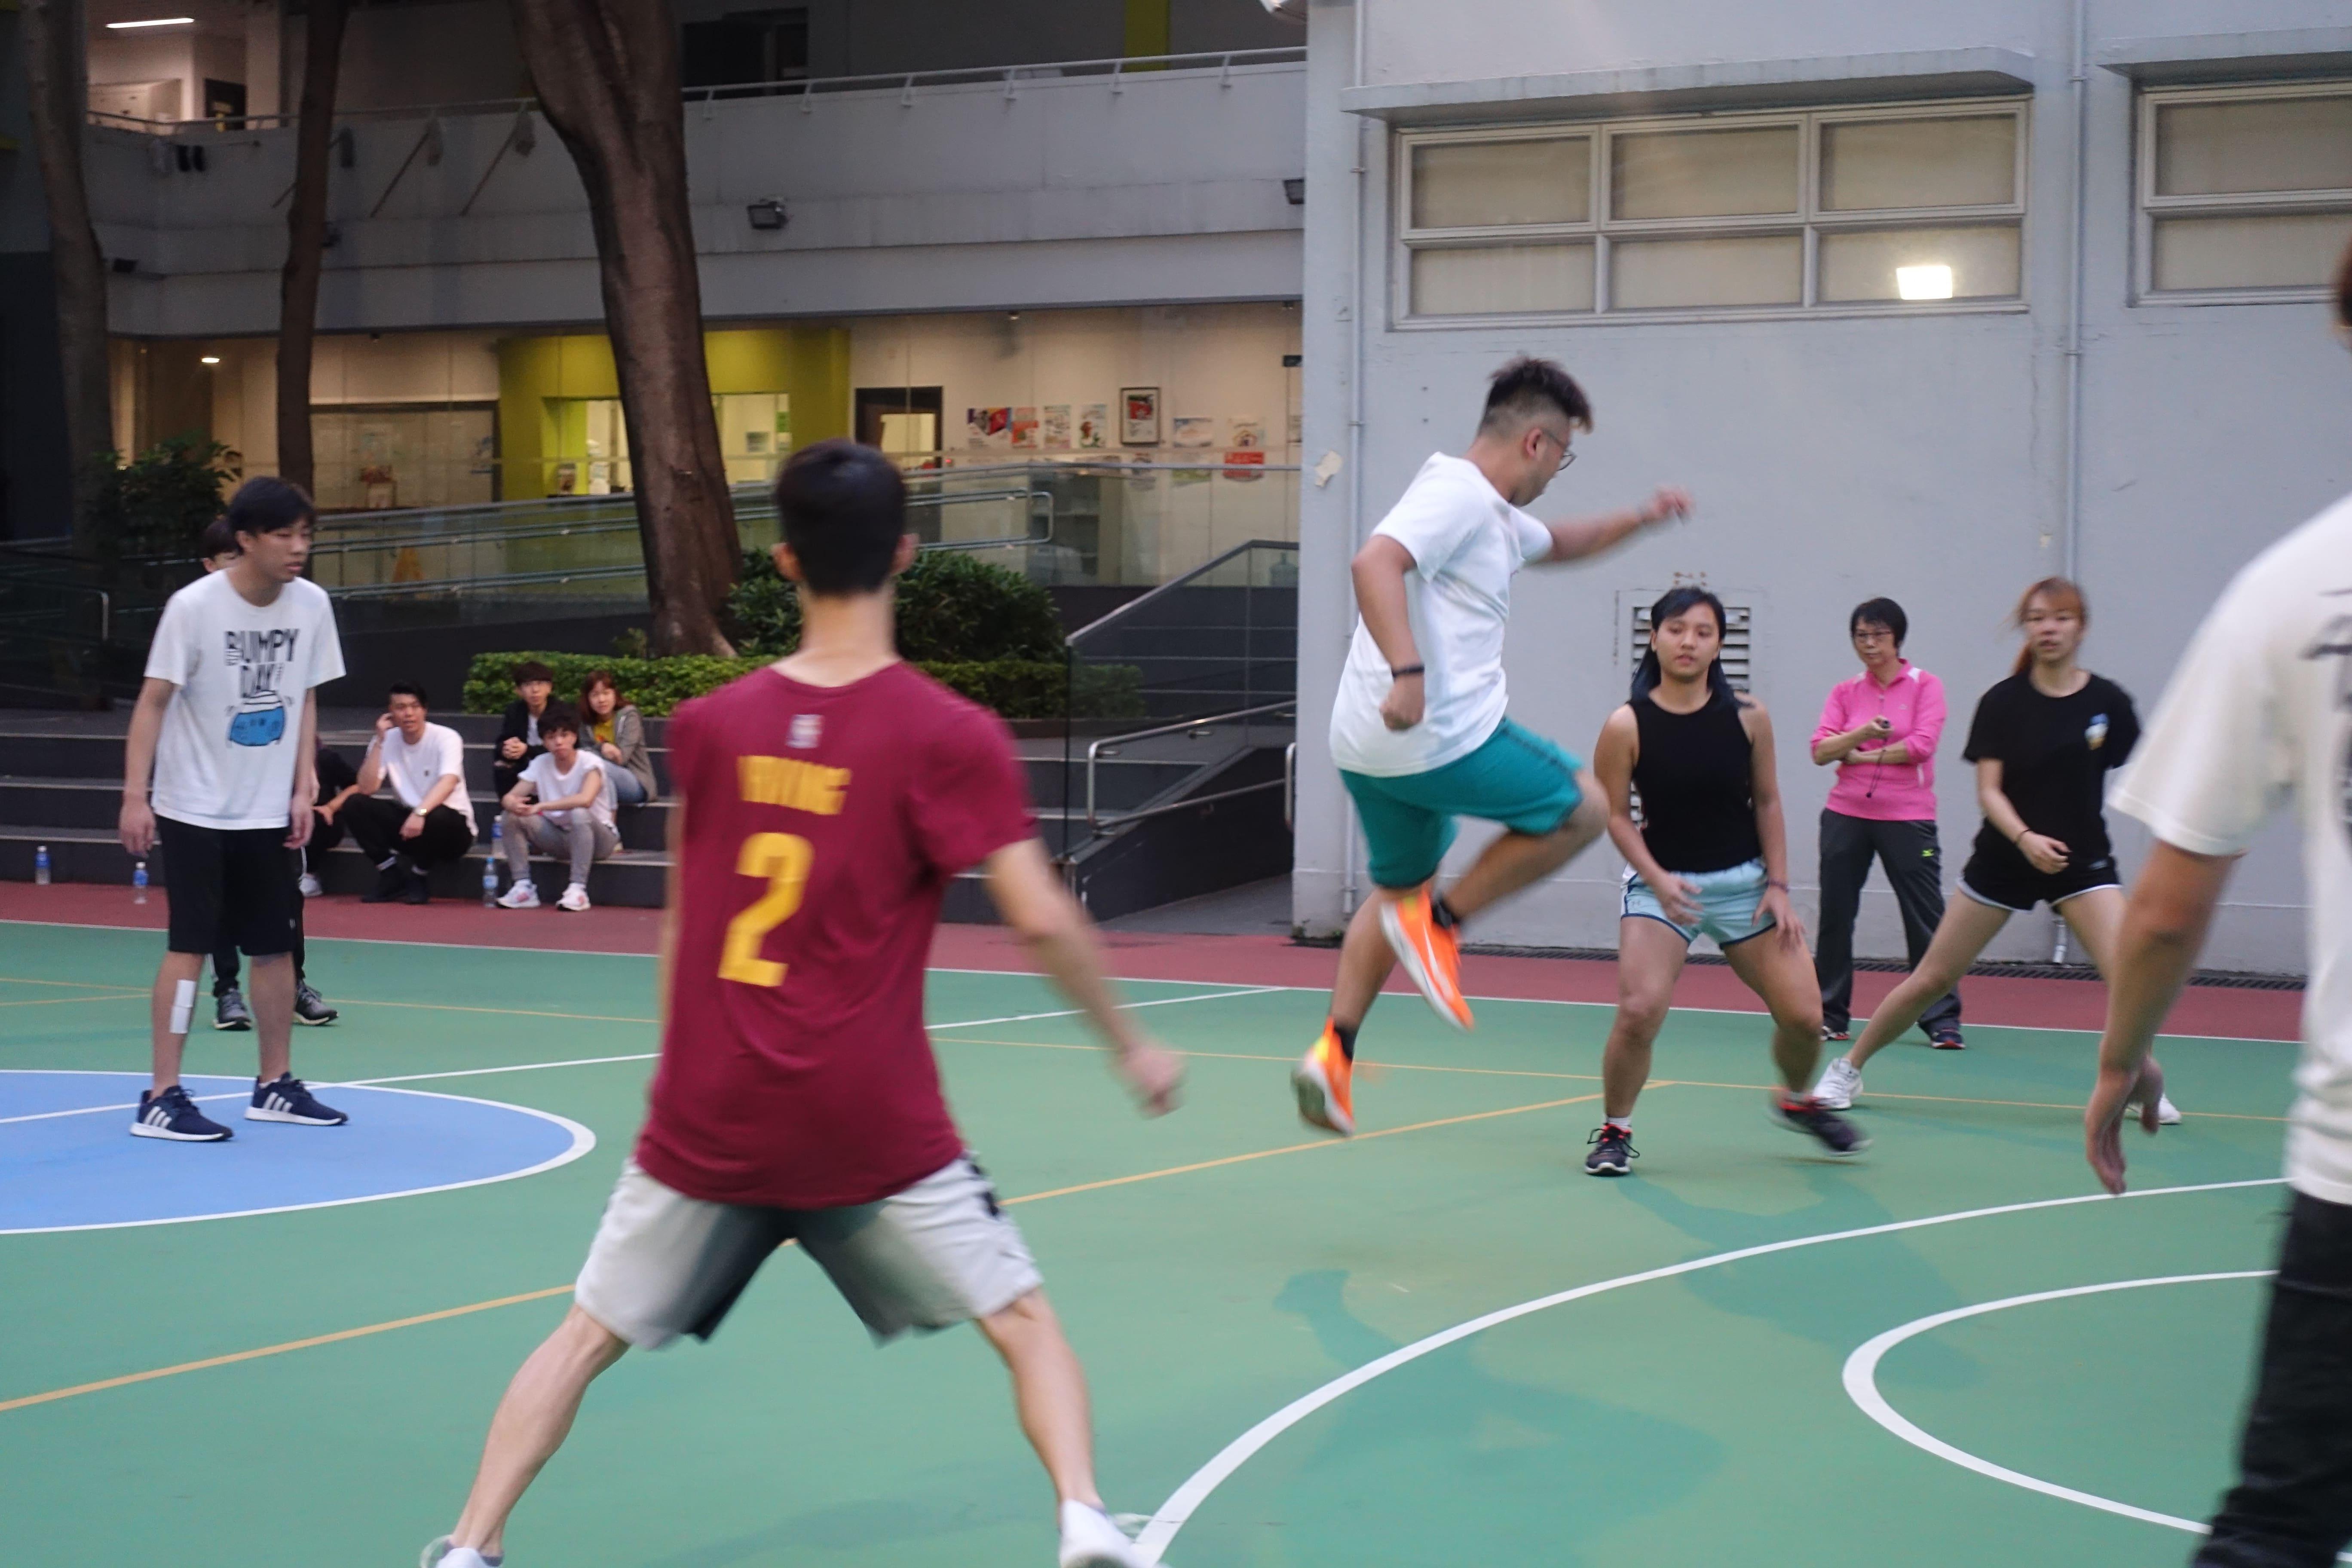 Player did his best for a jump, to win the dodgeball competition 